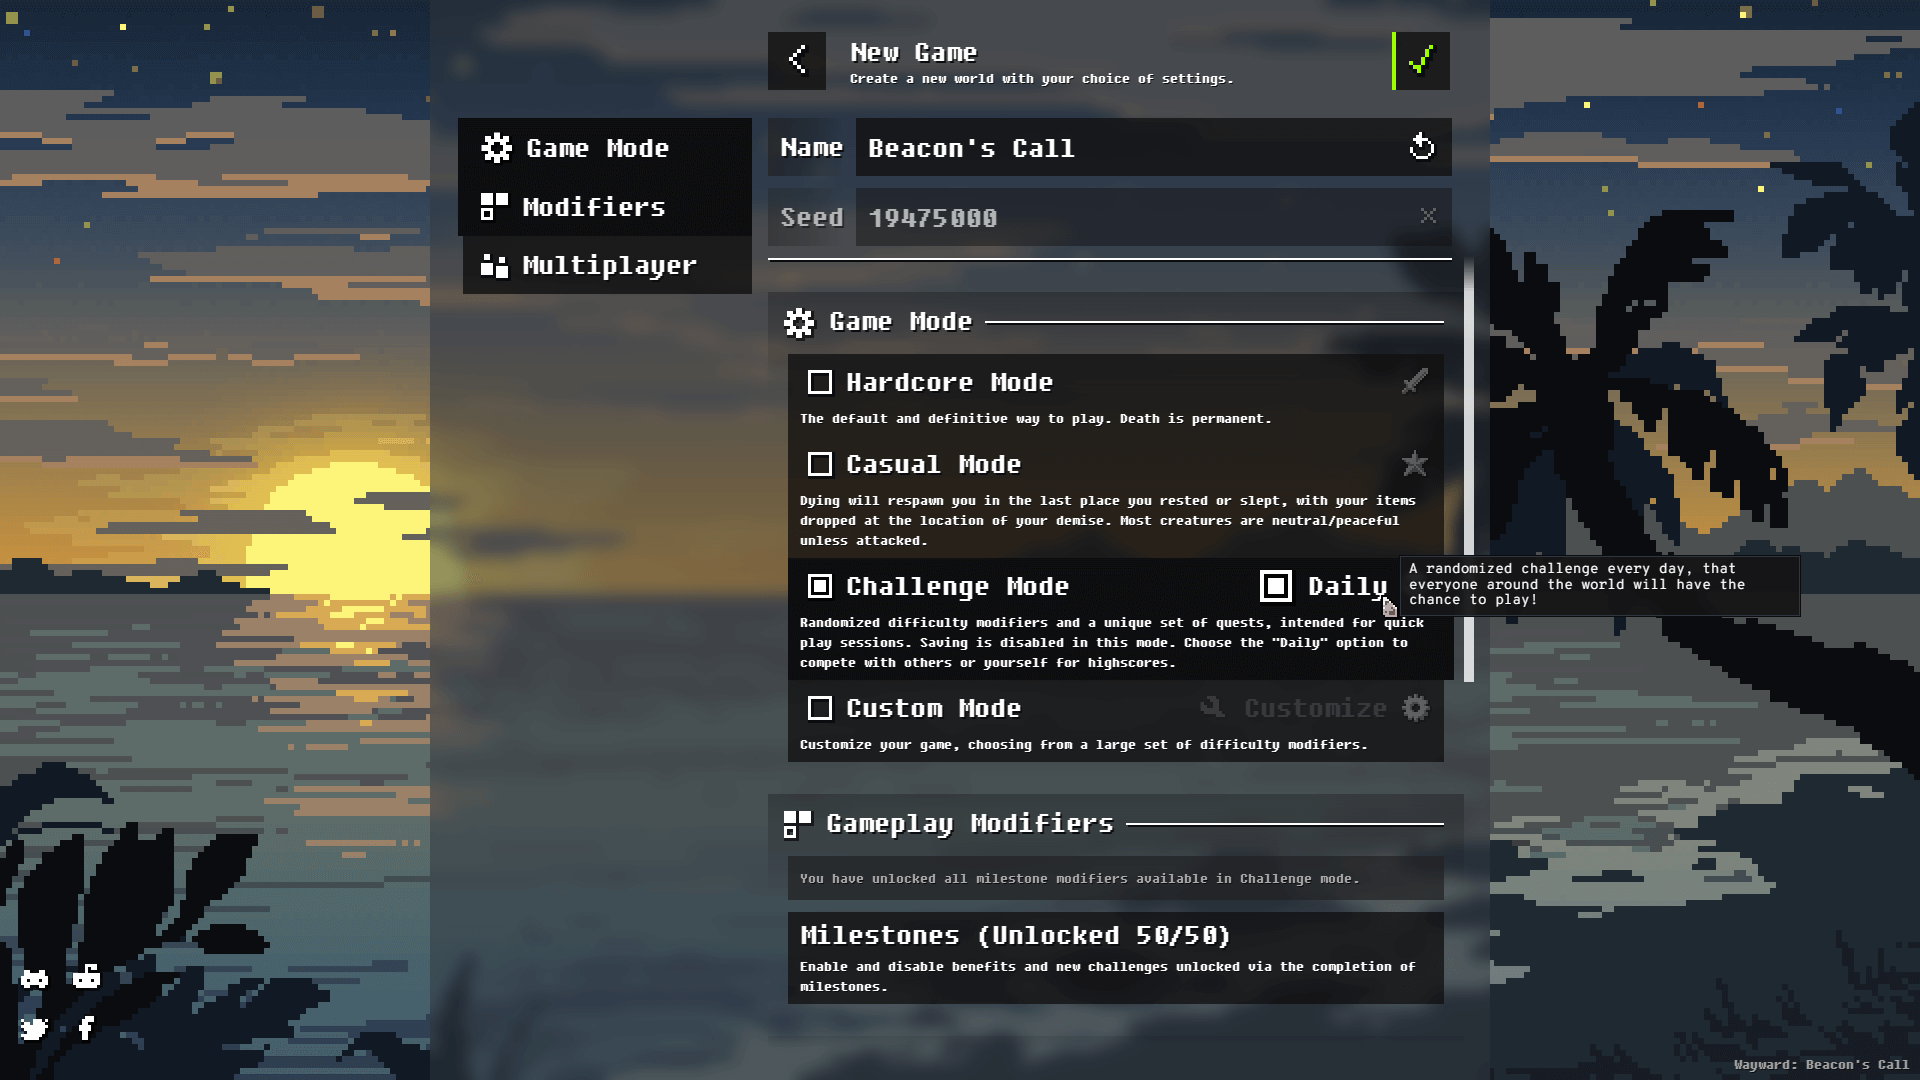 new-game-menu-expanded.png